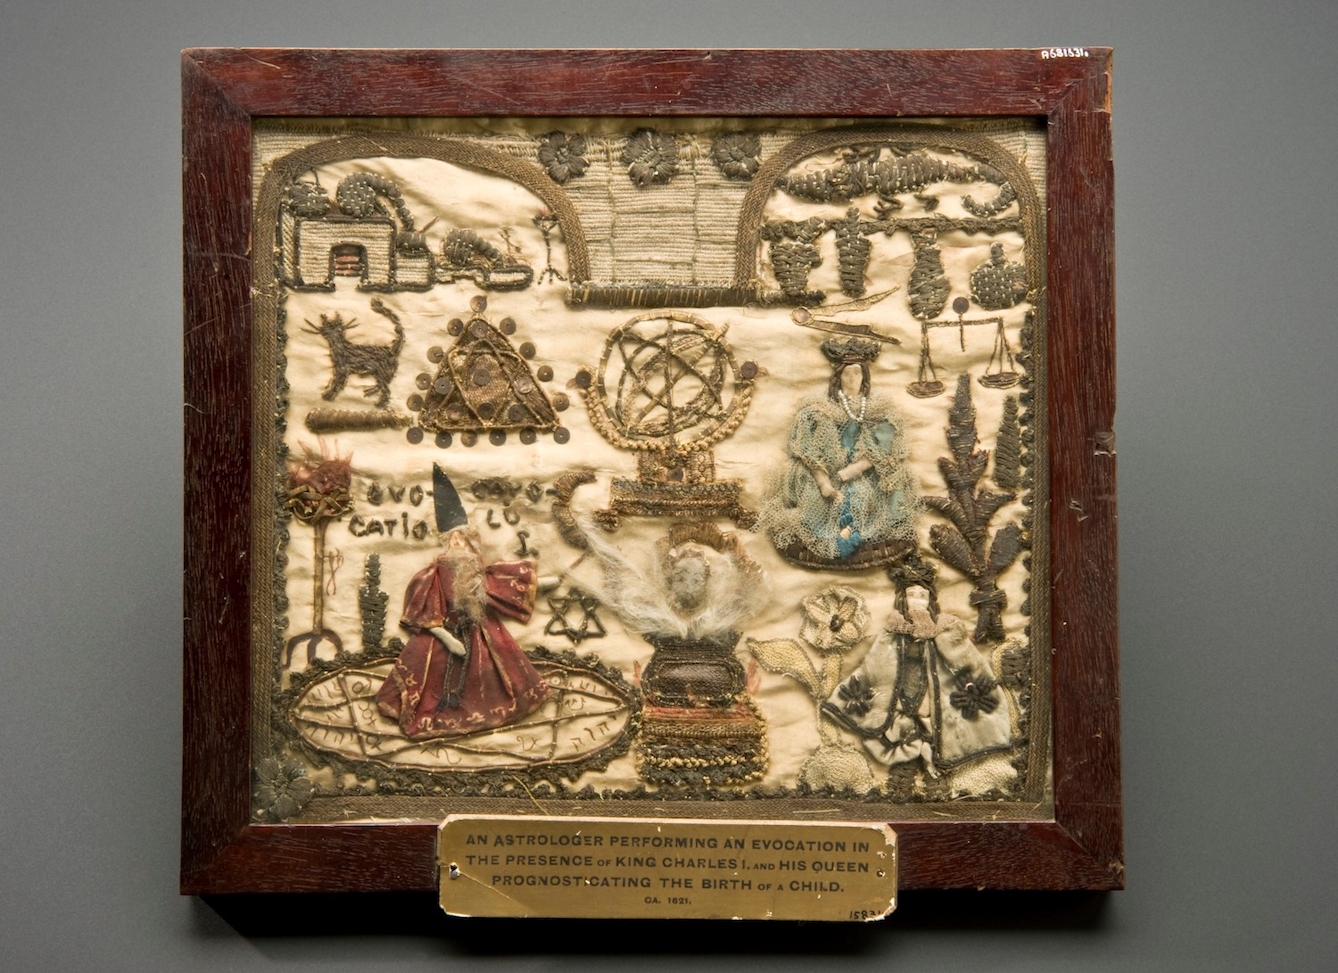 Image of embroidered square with wooden frame.